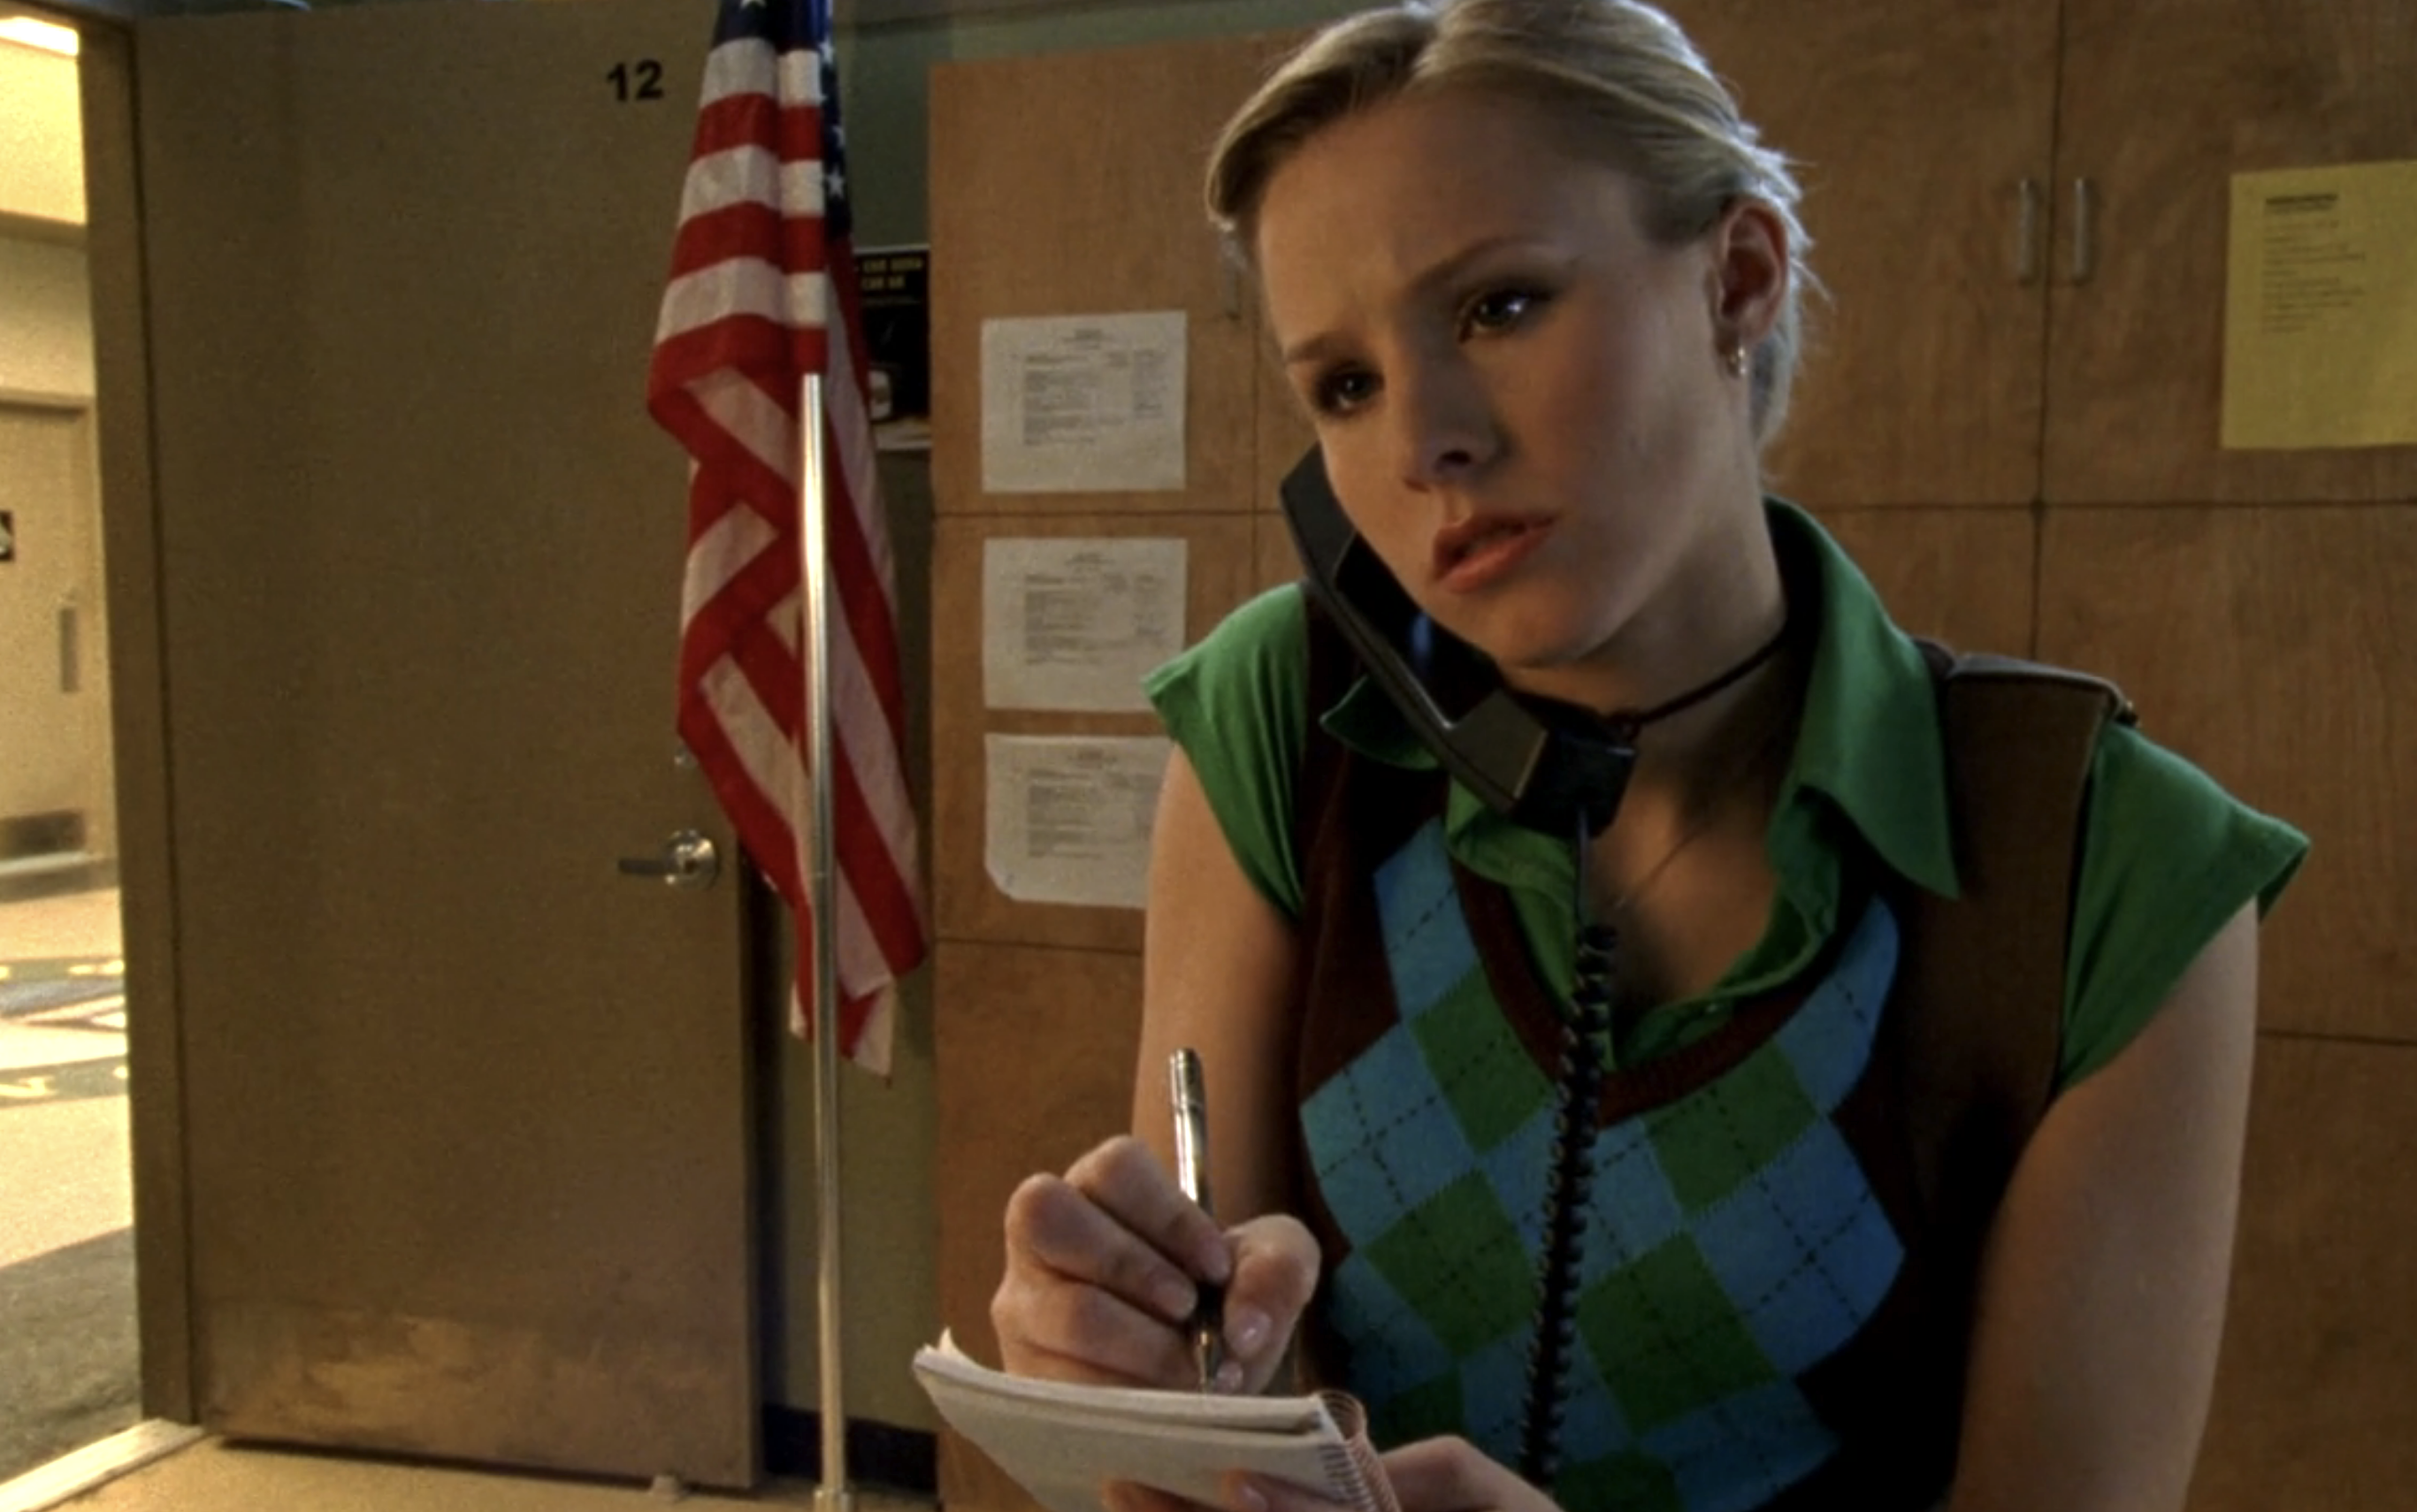 Screenshot from S1E18 of Veronica Mars. Veronica is wearing an argyle sweater vest and a green short underneath. She is taking notes in a small notebook and crading a corded telephone on her right side.